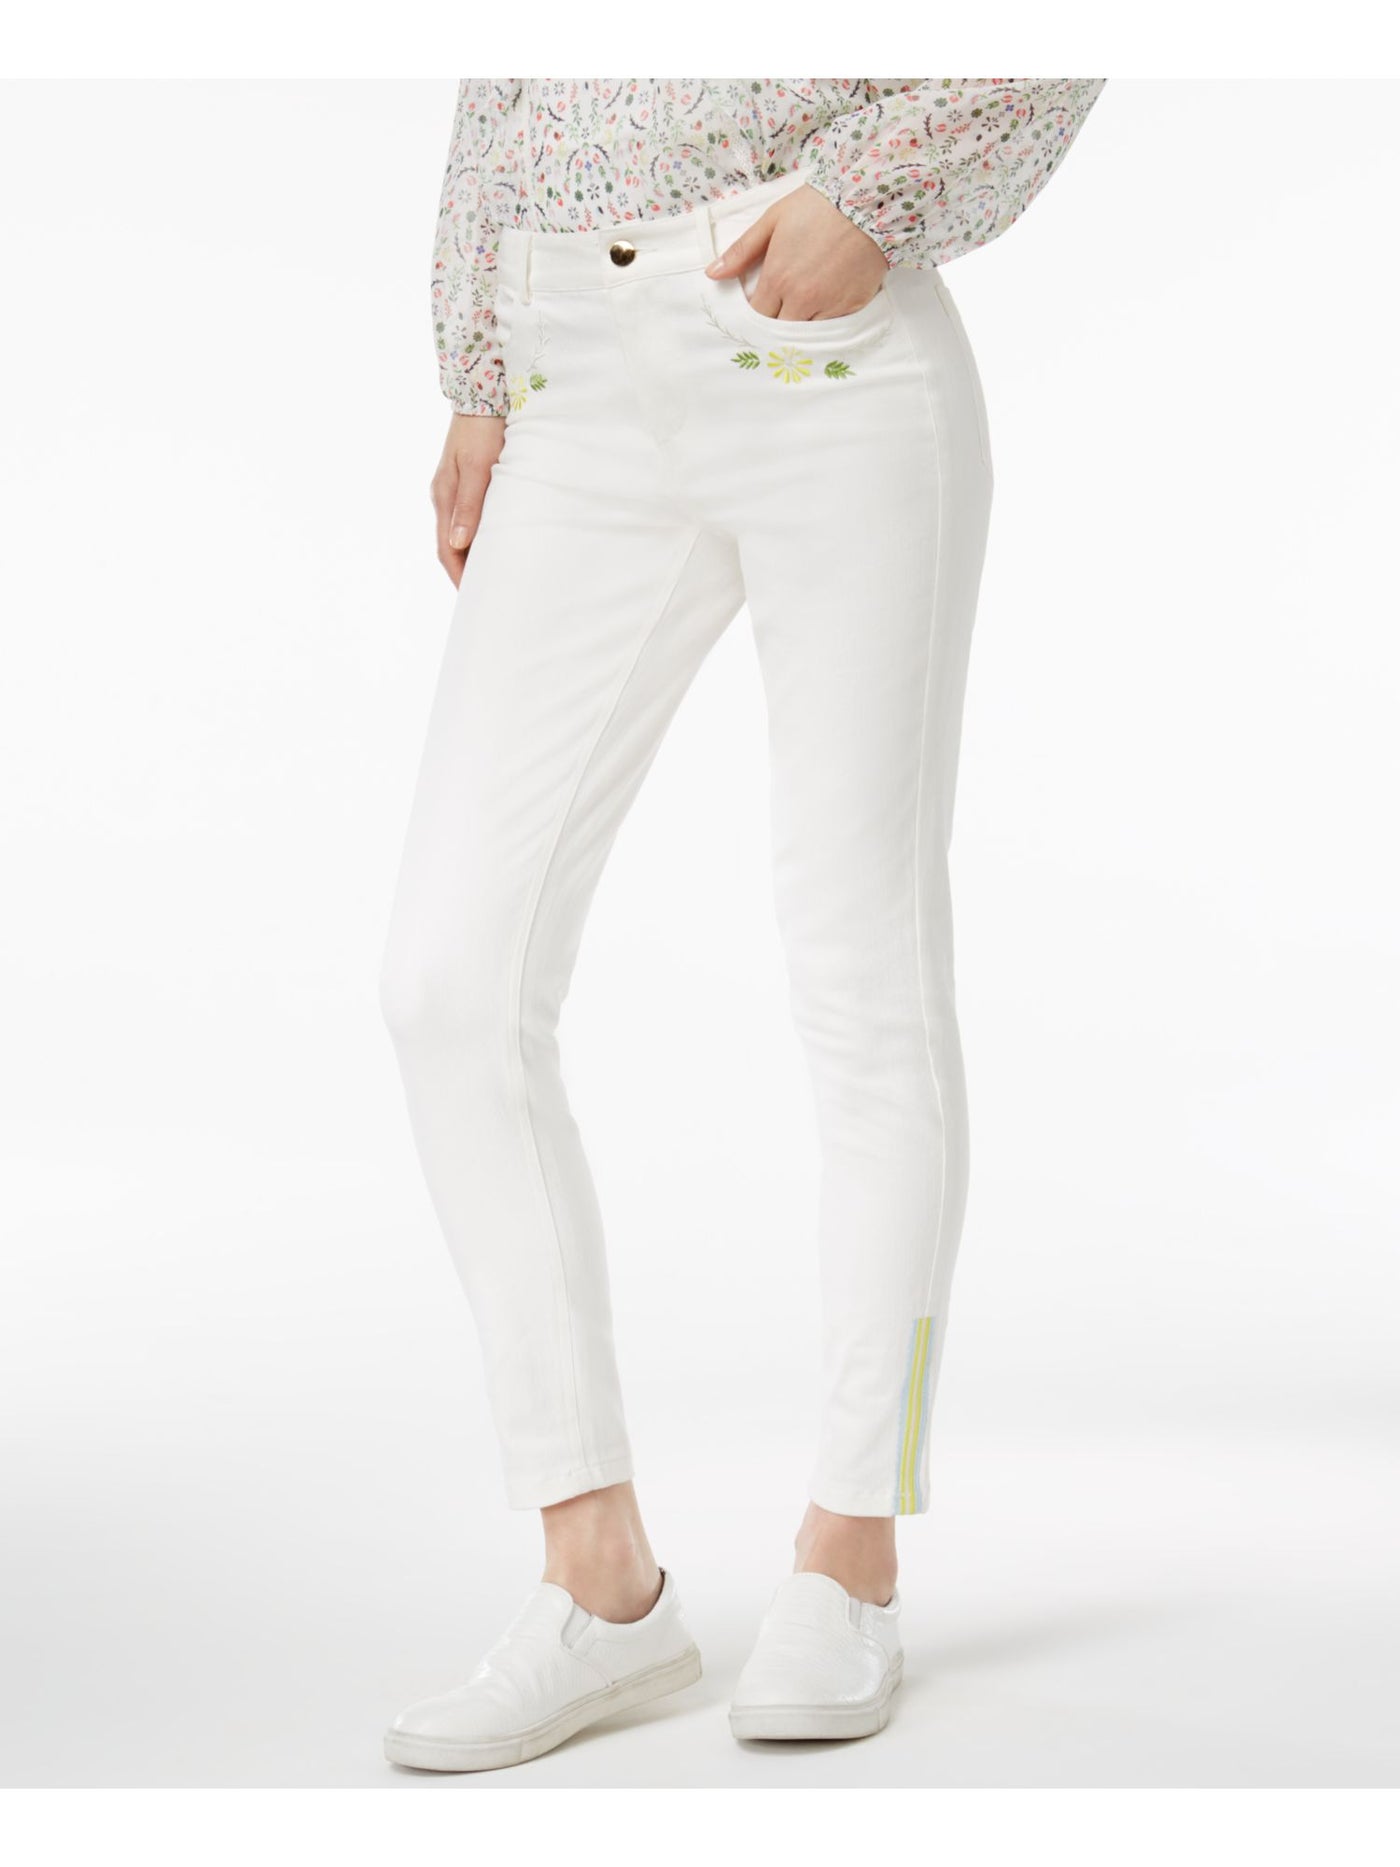 CYNTHIA ROWLEY Womens White Embroidered Skinny Jeans 12